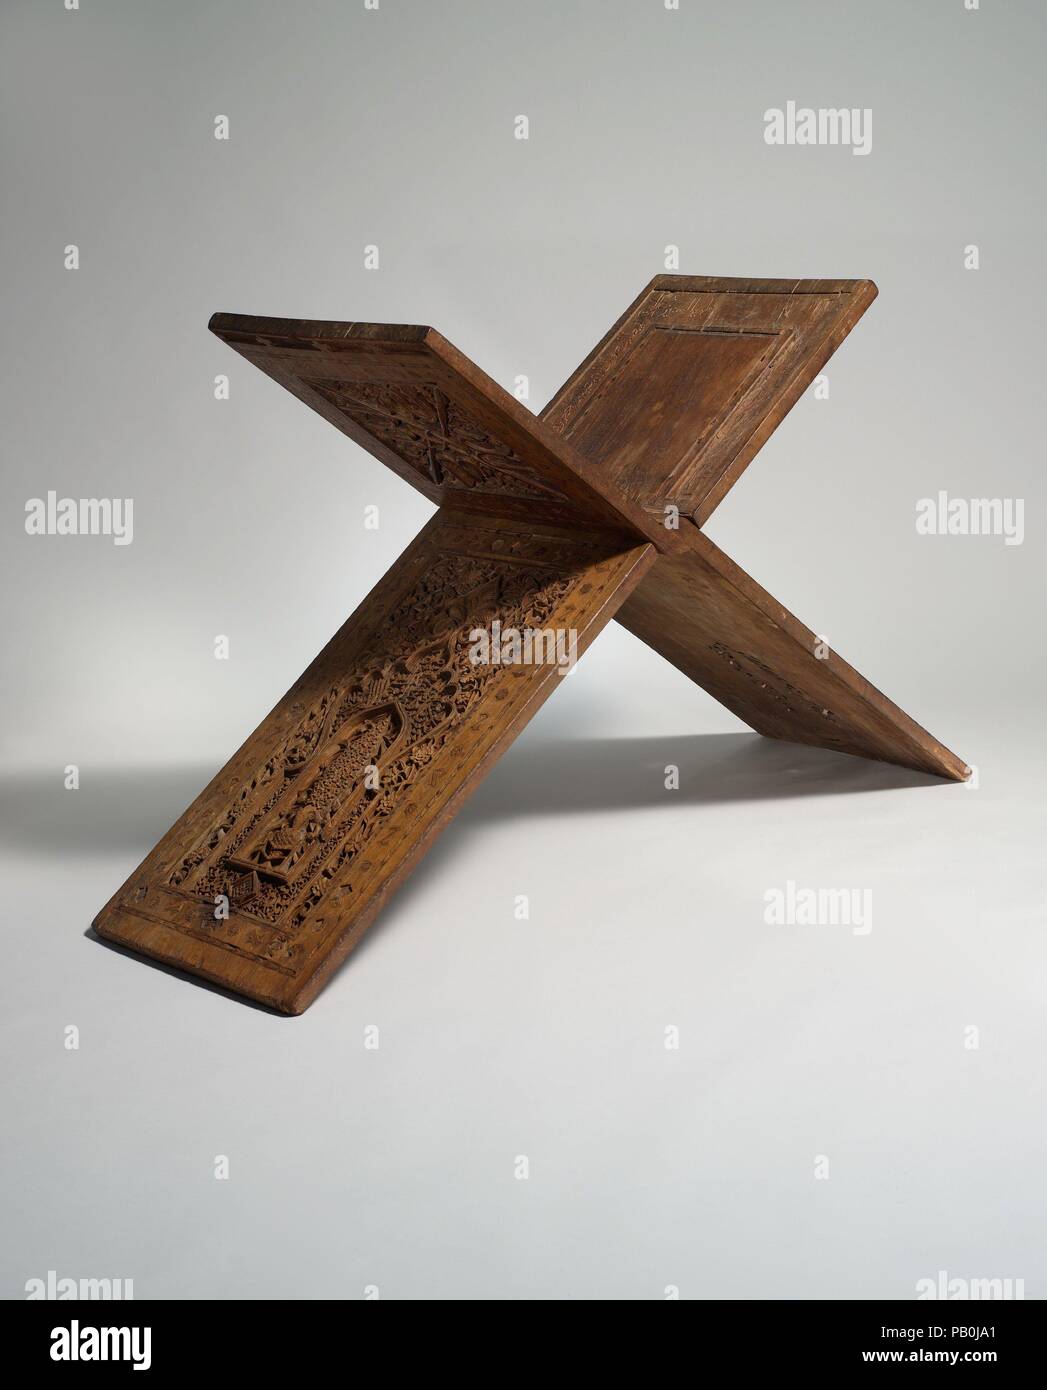 Stand for a Qur'an Manuscript. Dimensions: W. (when closed) 16 1/8 in. (41 cm)  H. (when closed) 51 1/4 in. (130.2 cm)  Dimensions when open: H. 45 in. (114.3 cm)  W. 50 in. (127 cm)  D. 16 1/2 in. (41.9 cm). Maker: Zain(?) Hasan Sulaiman Isfahani. Date: dated A.H. 761/A.D. 1360.  Three layers of superb carving combining vegetal motifs and calligraphic inscriptions cover the surface of this Qur'an stand. The inscriptions include decorative arrangements of the words Allah, 'Ali, and Muhammad, and blessings upon the Prophet and the Twelve Imams. In addition, they provide us with the information  Stock Photo